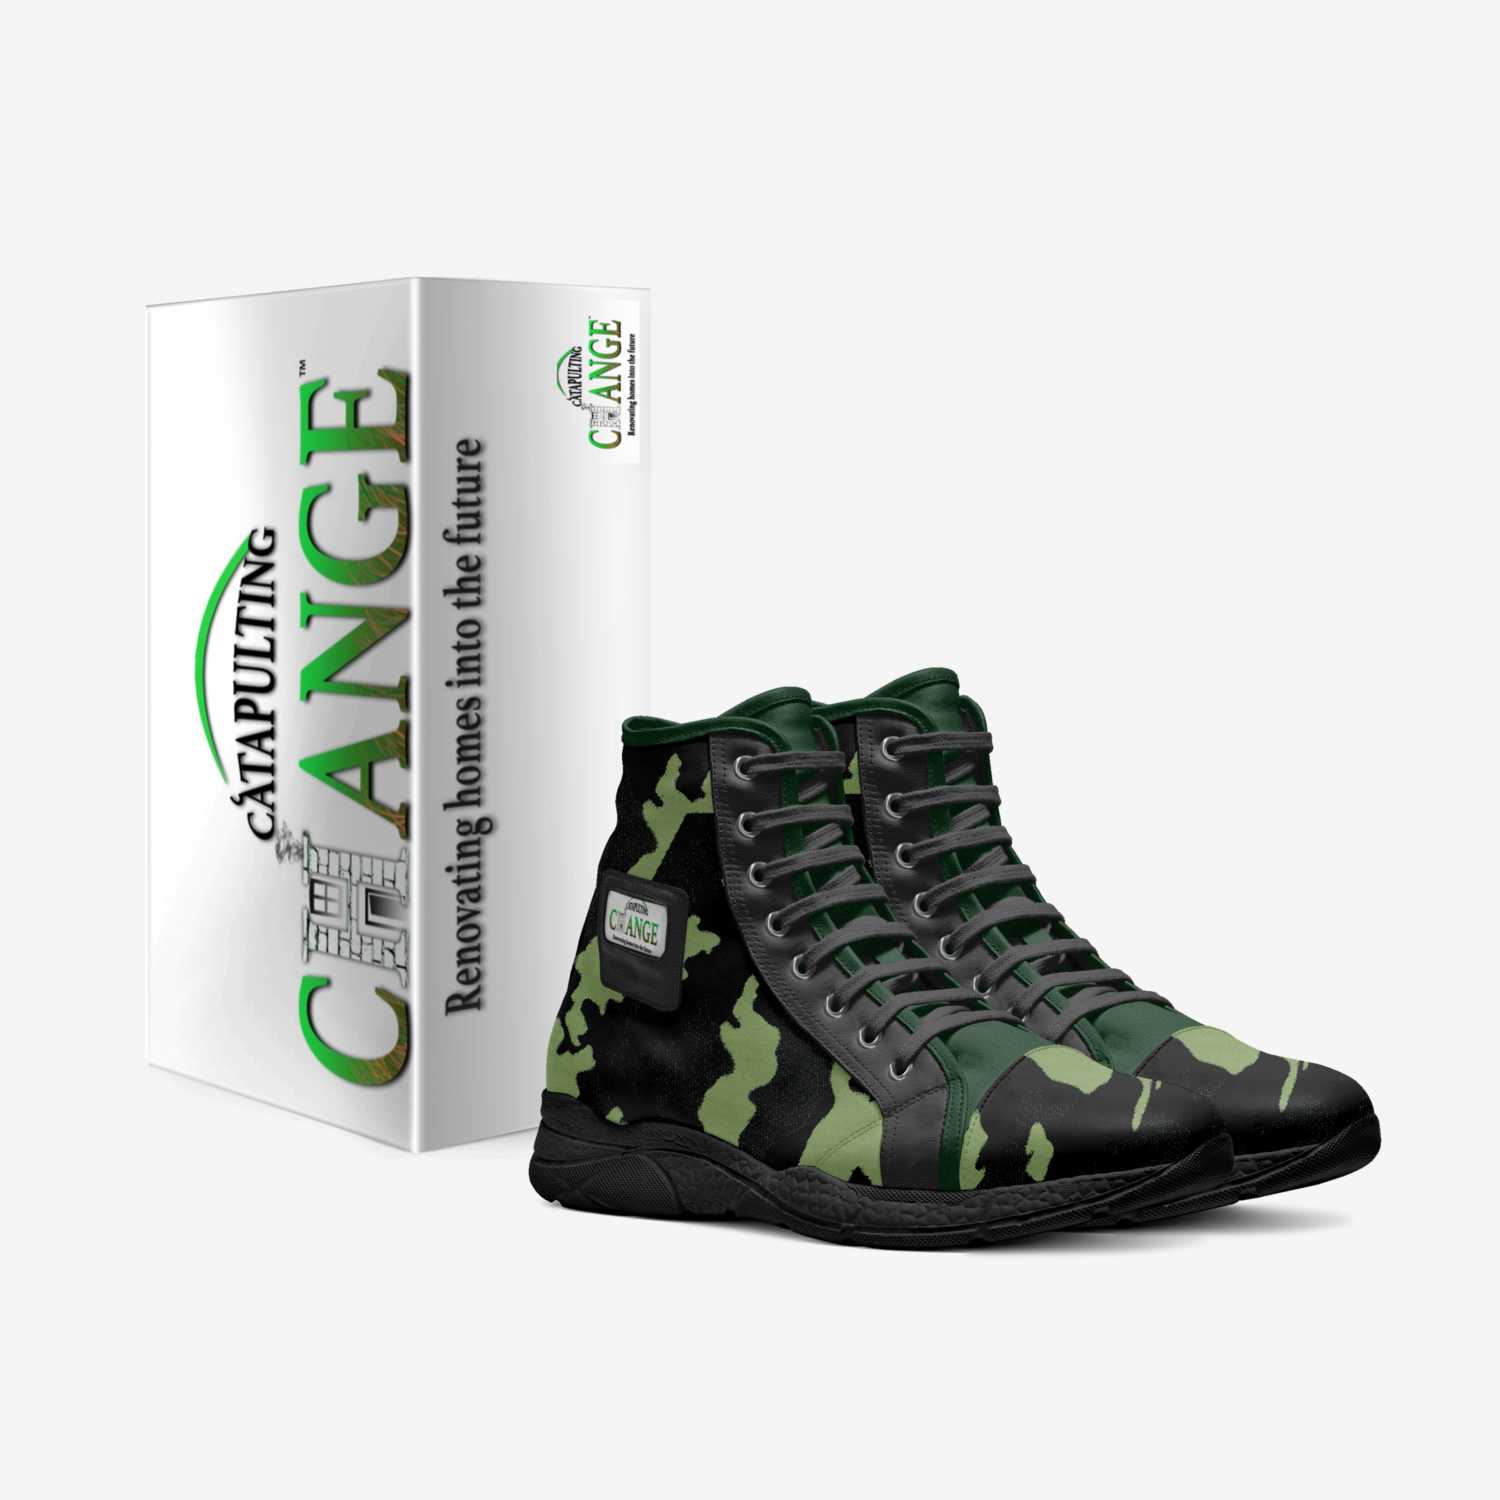 CCHANGE  custom made in Italy shoes by Kenneth Bryant | Box view